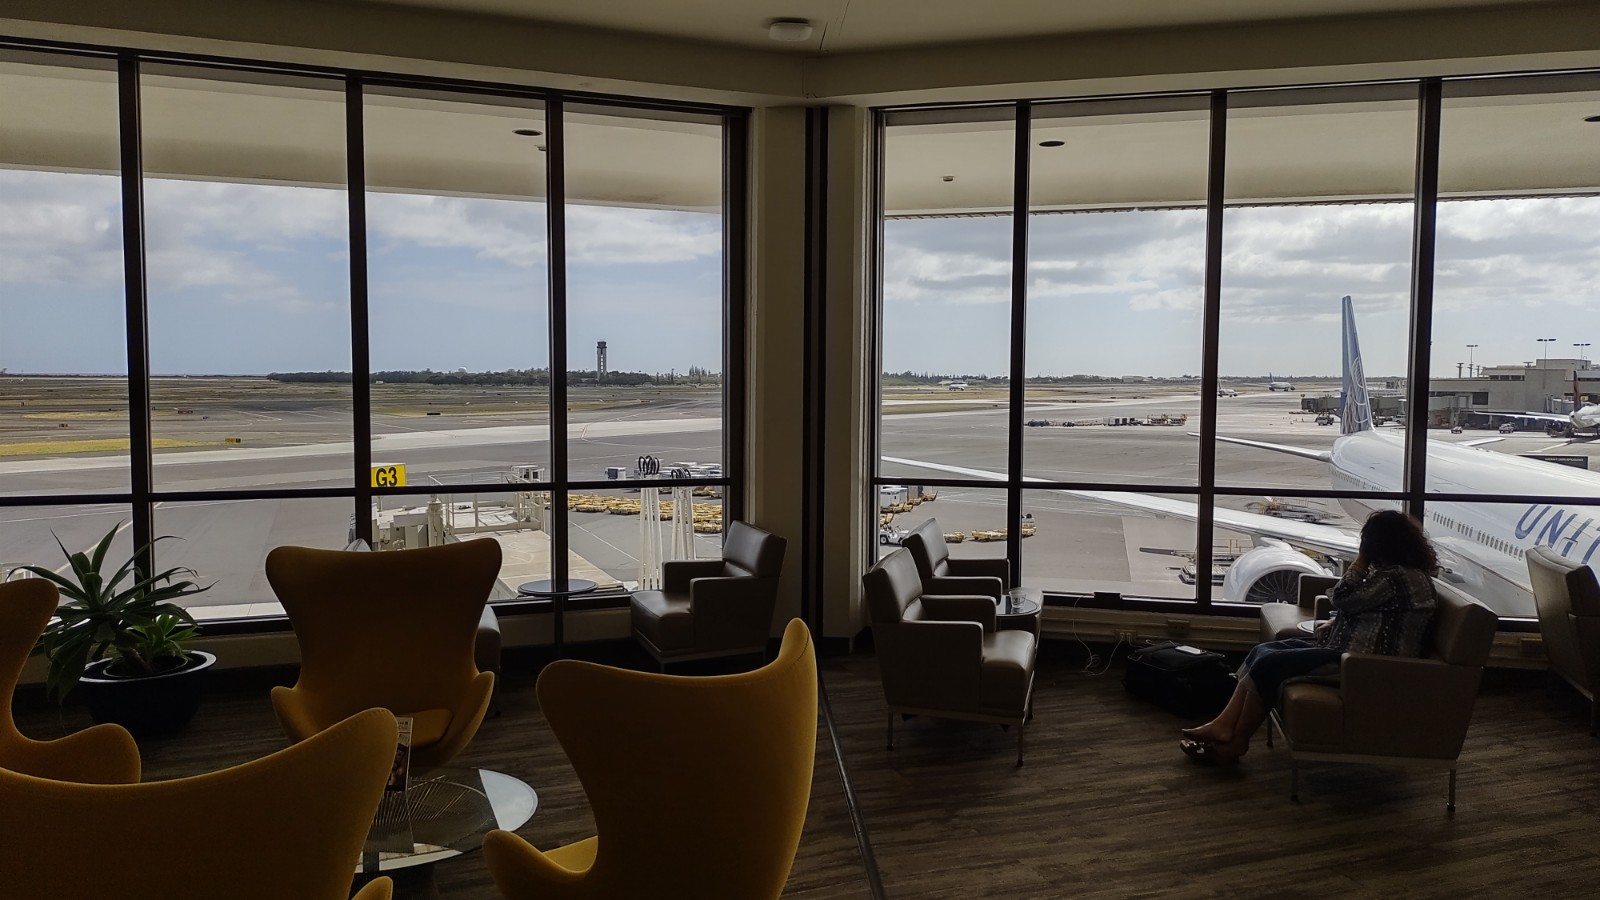 PICTURE OF HE UNITED CLUB LOUNGE OVERLOOKING THE RAMP AREA.